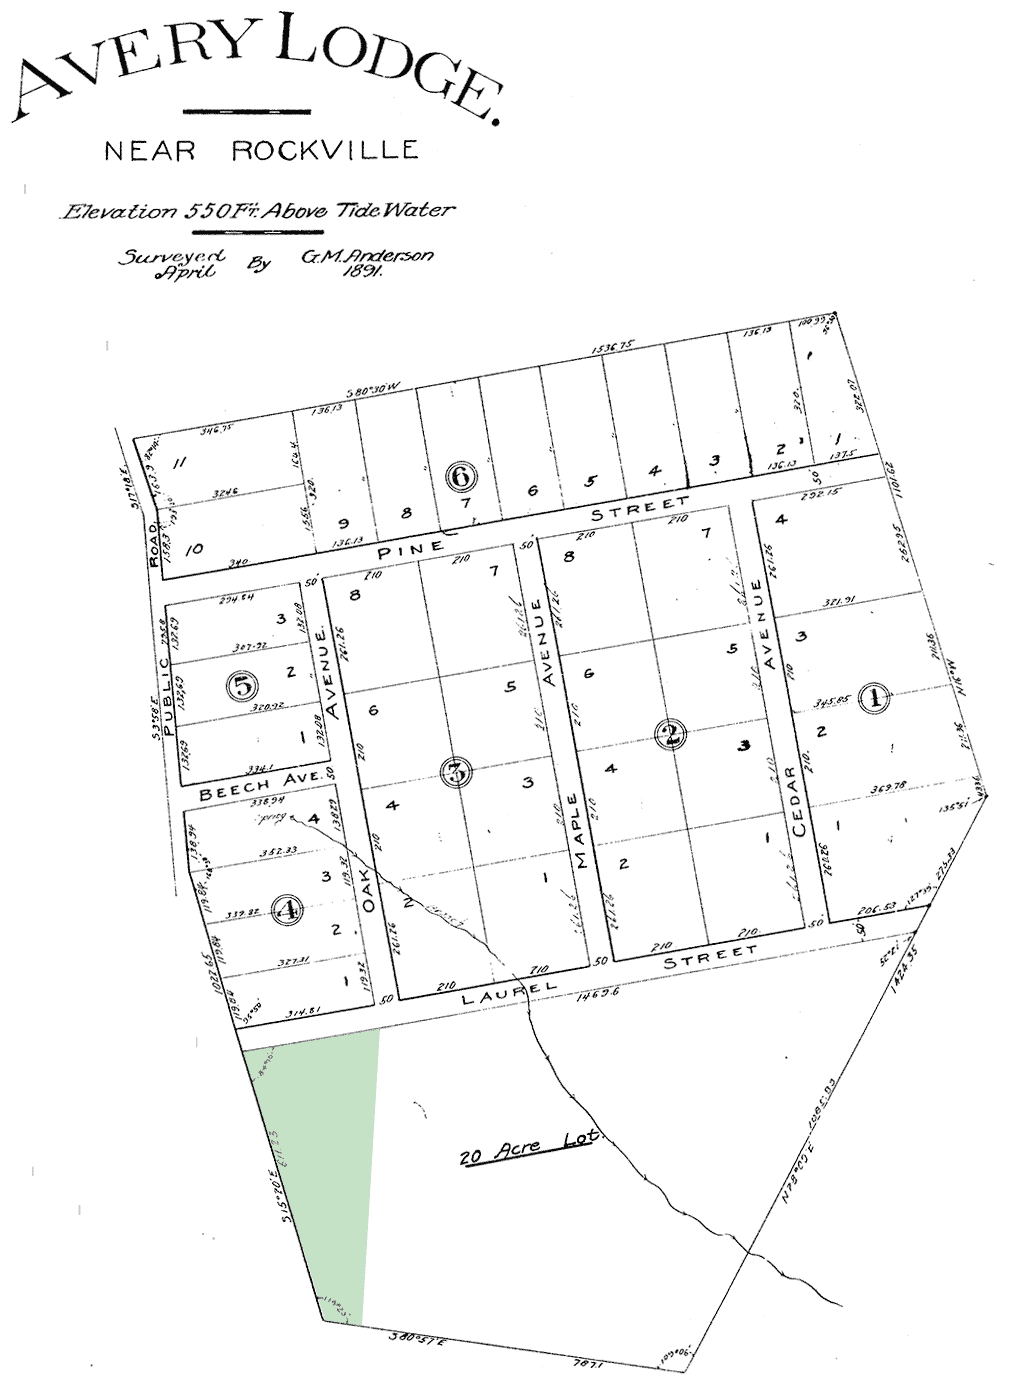 1891 plat of the proposed Avery Lodge community to the north of our future lot. Laurel Street runs along the northern border of our property.